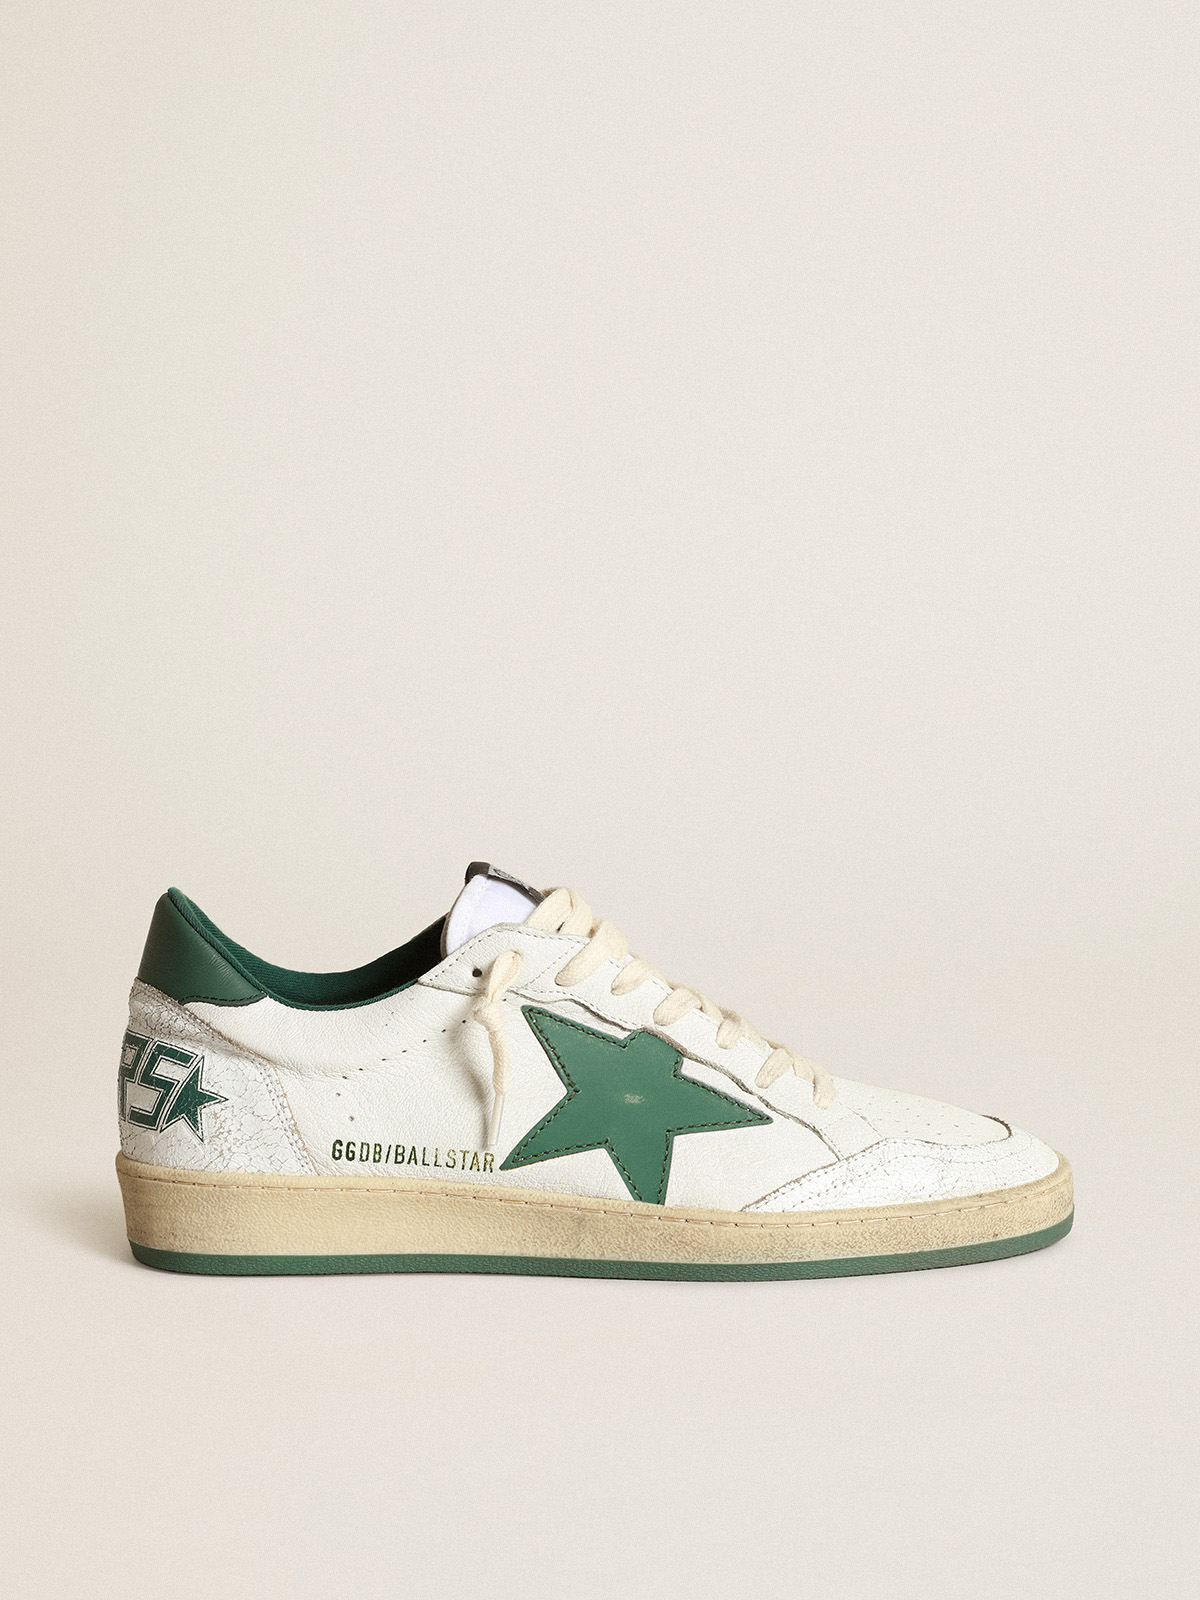 Strictly wax Expensive Ball Star sneakers in white nappa leather with mat green leather star and  heel tab | Golden Goose